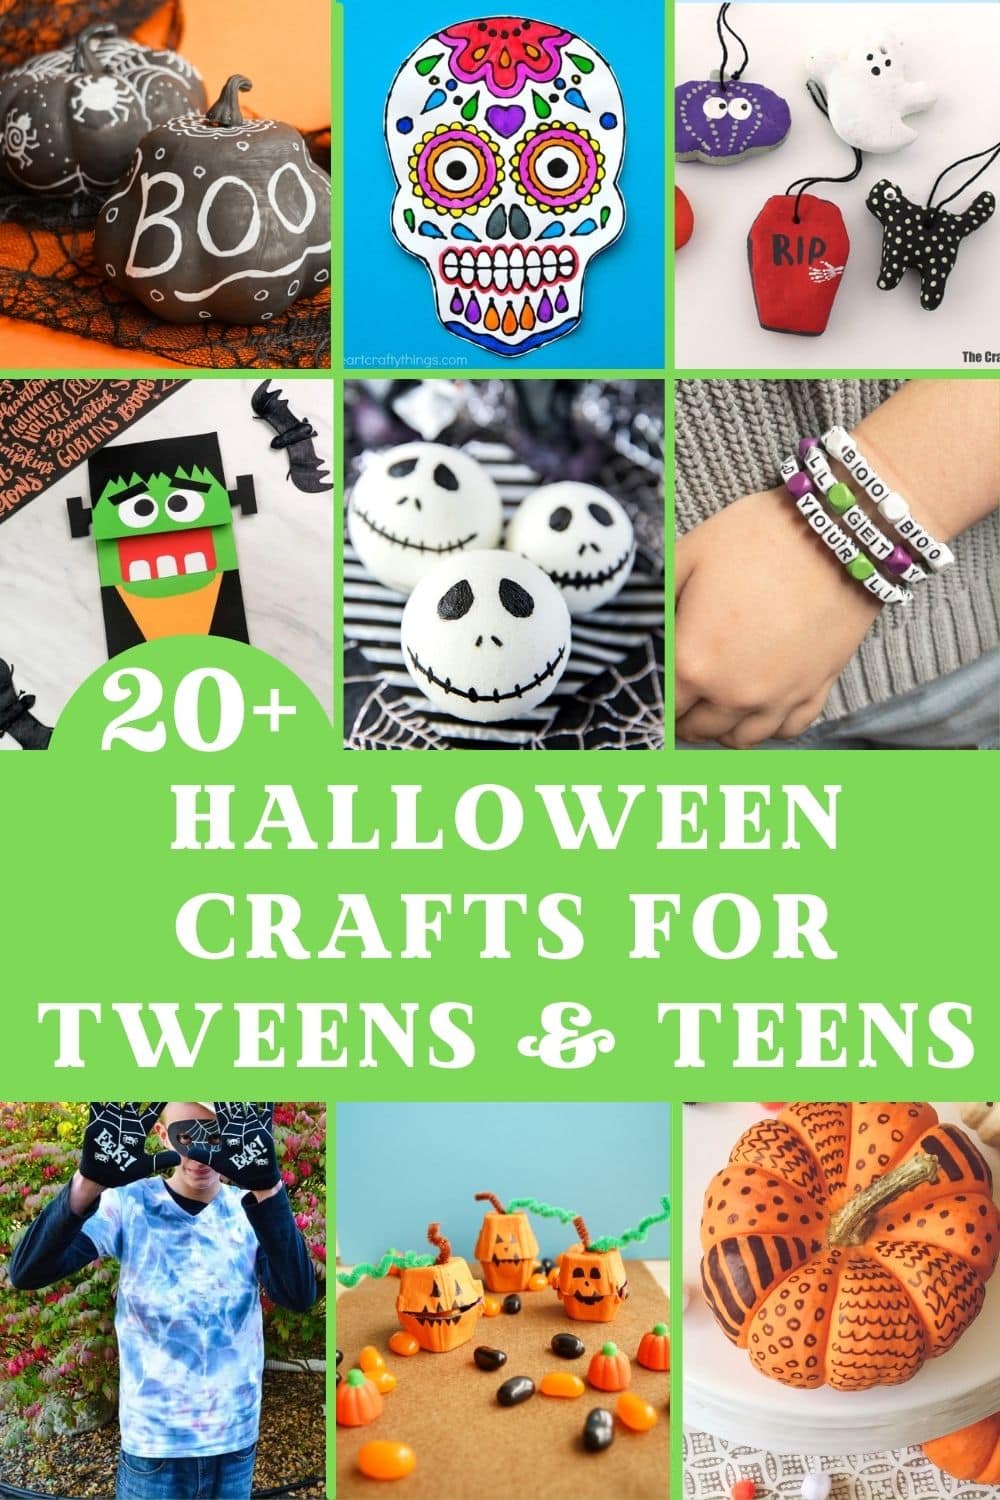 https://www.kitchencounterchronicle.com/wp-content/uploads/2020/09/fun-halloween-crafts-for-tweens-and-teens-to-make-new-pin.jpg